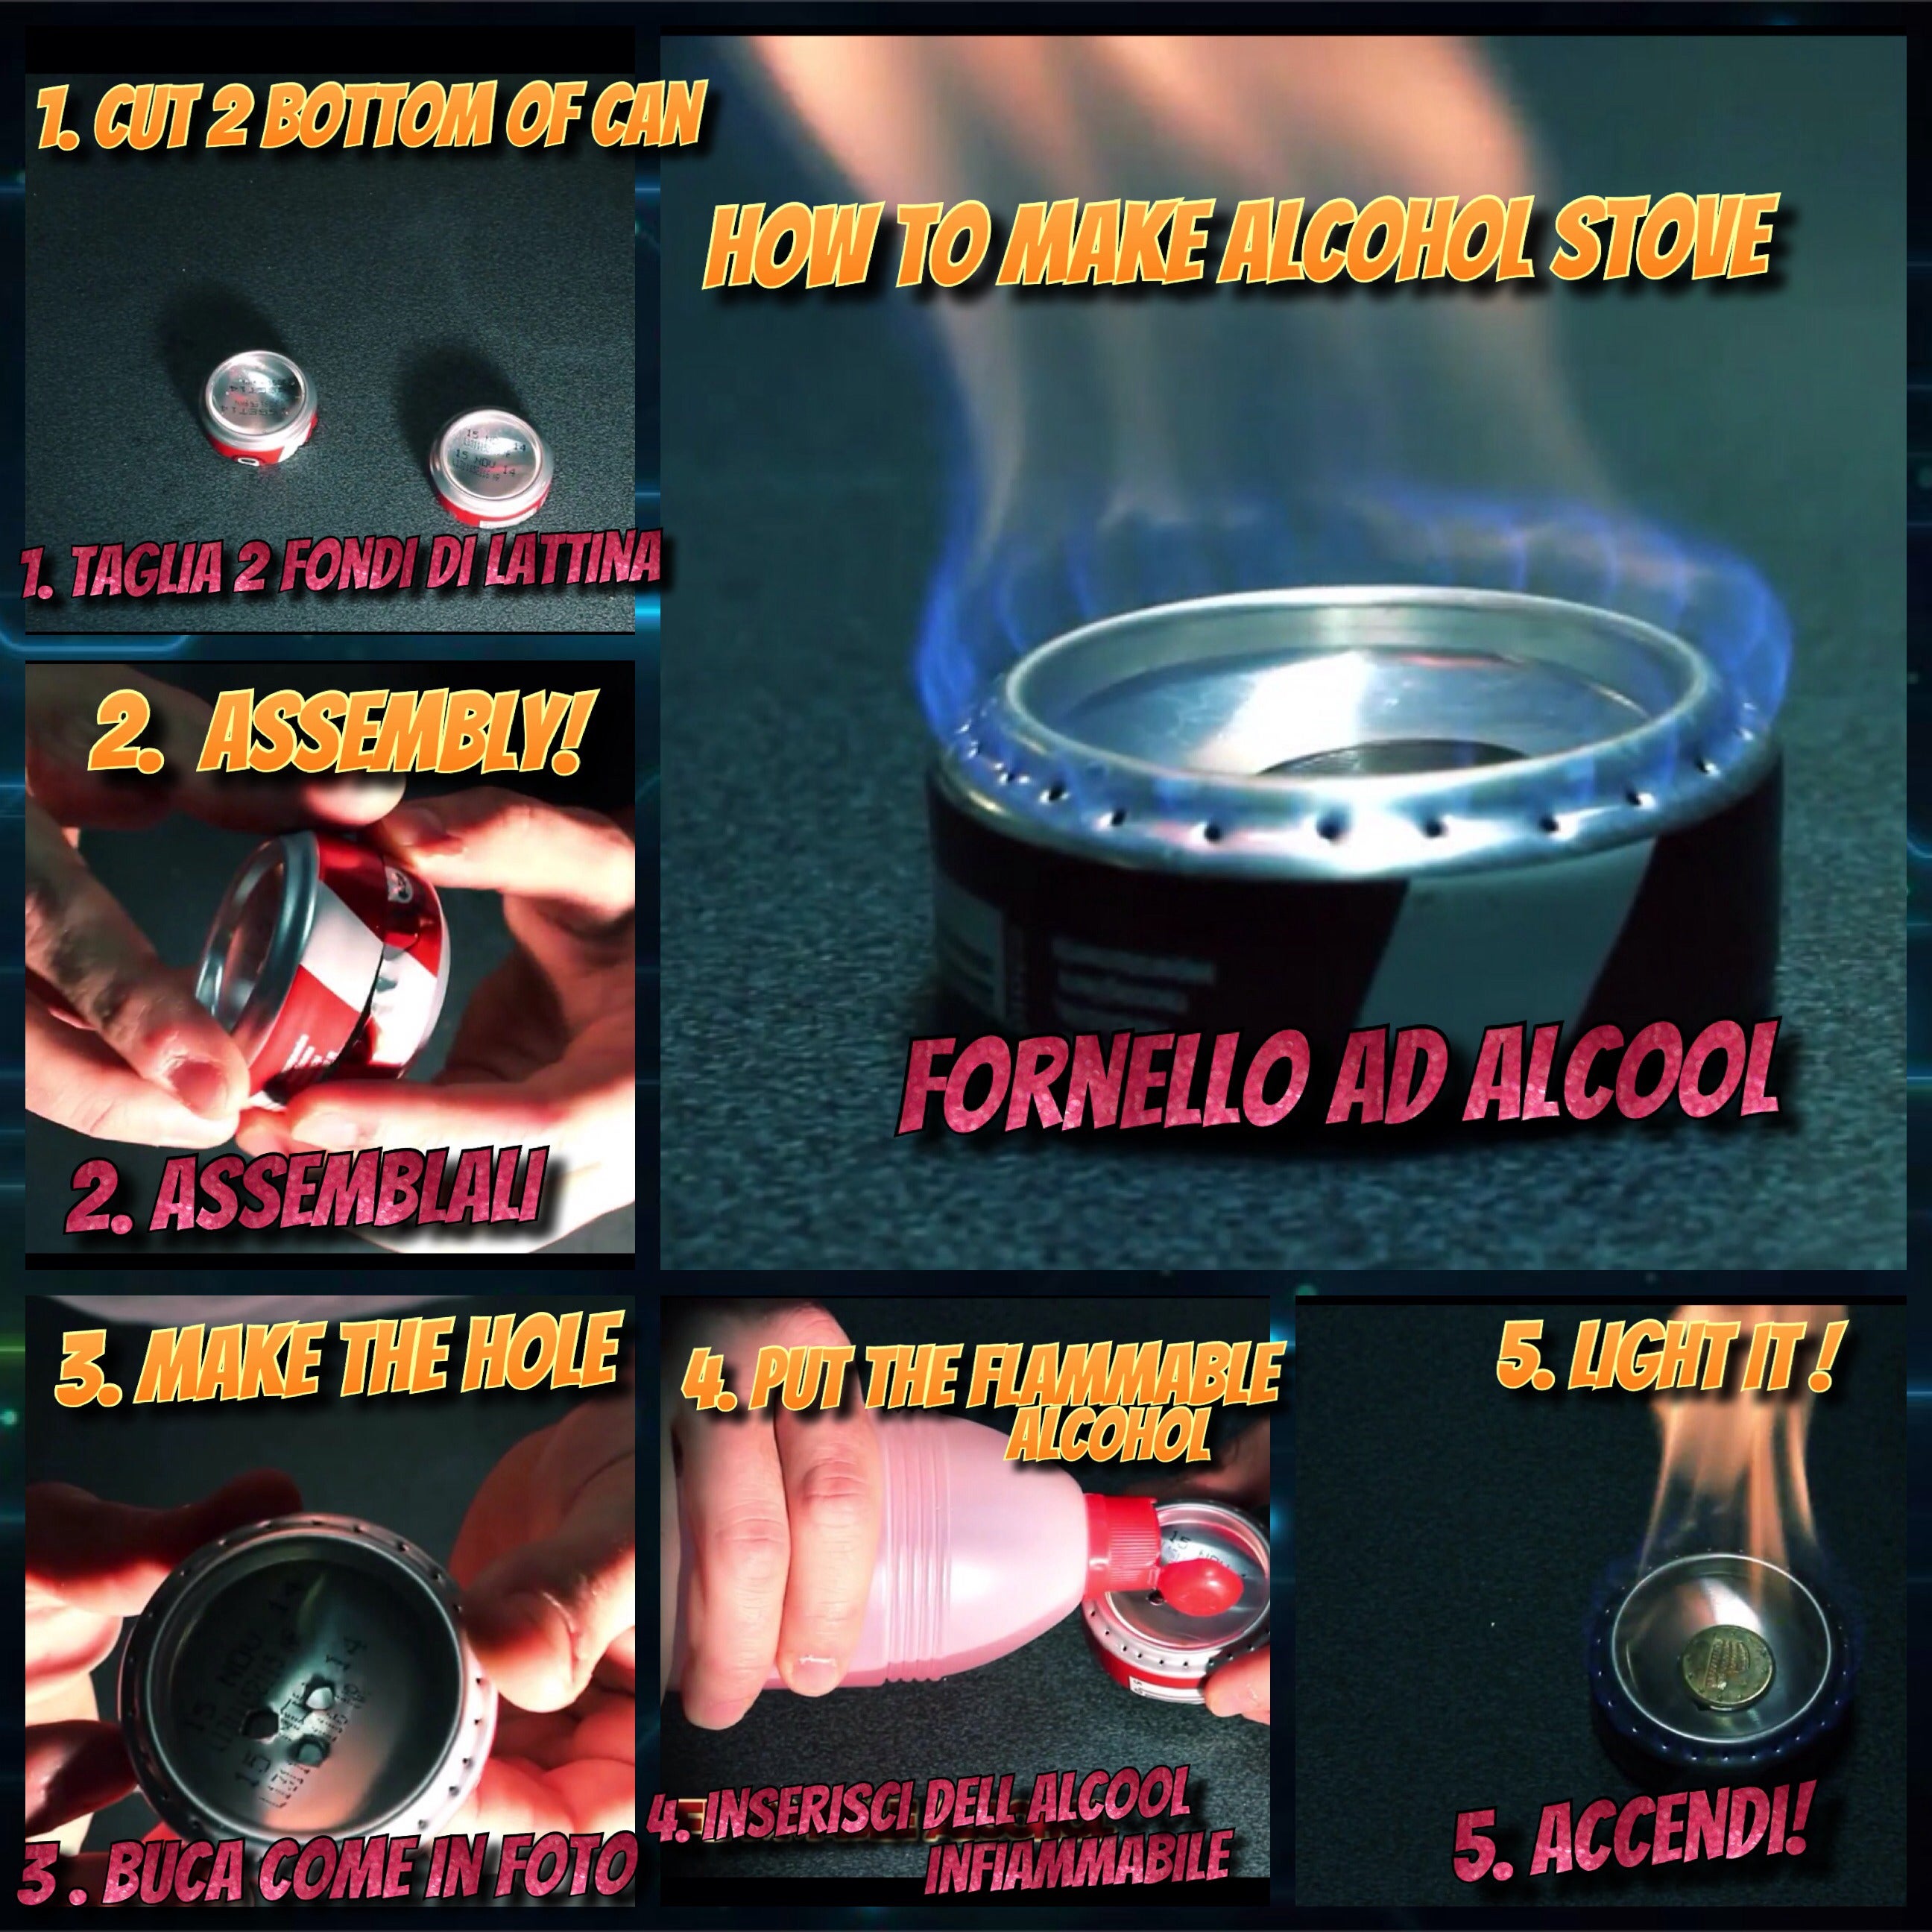 HOW TO MAKE THE ALCOHOL STOVE